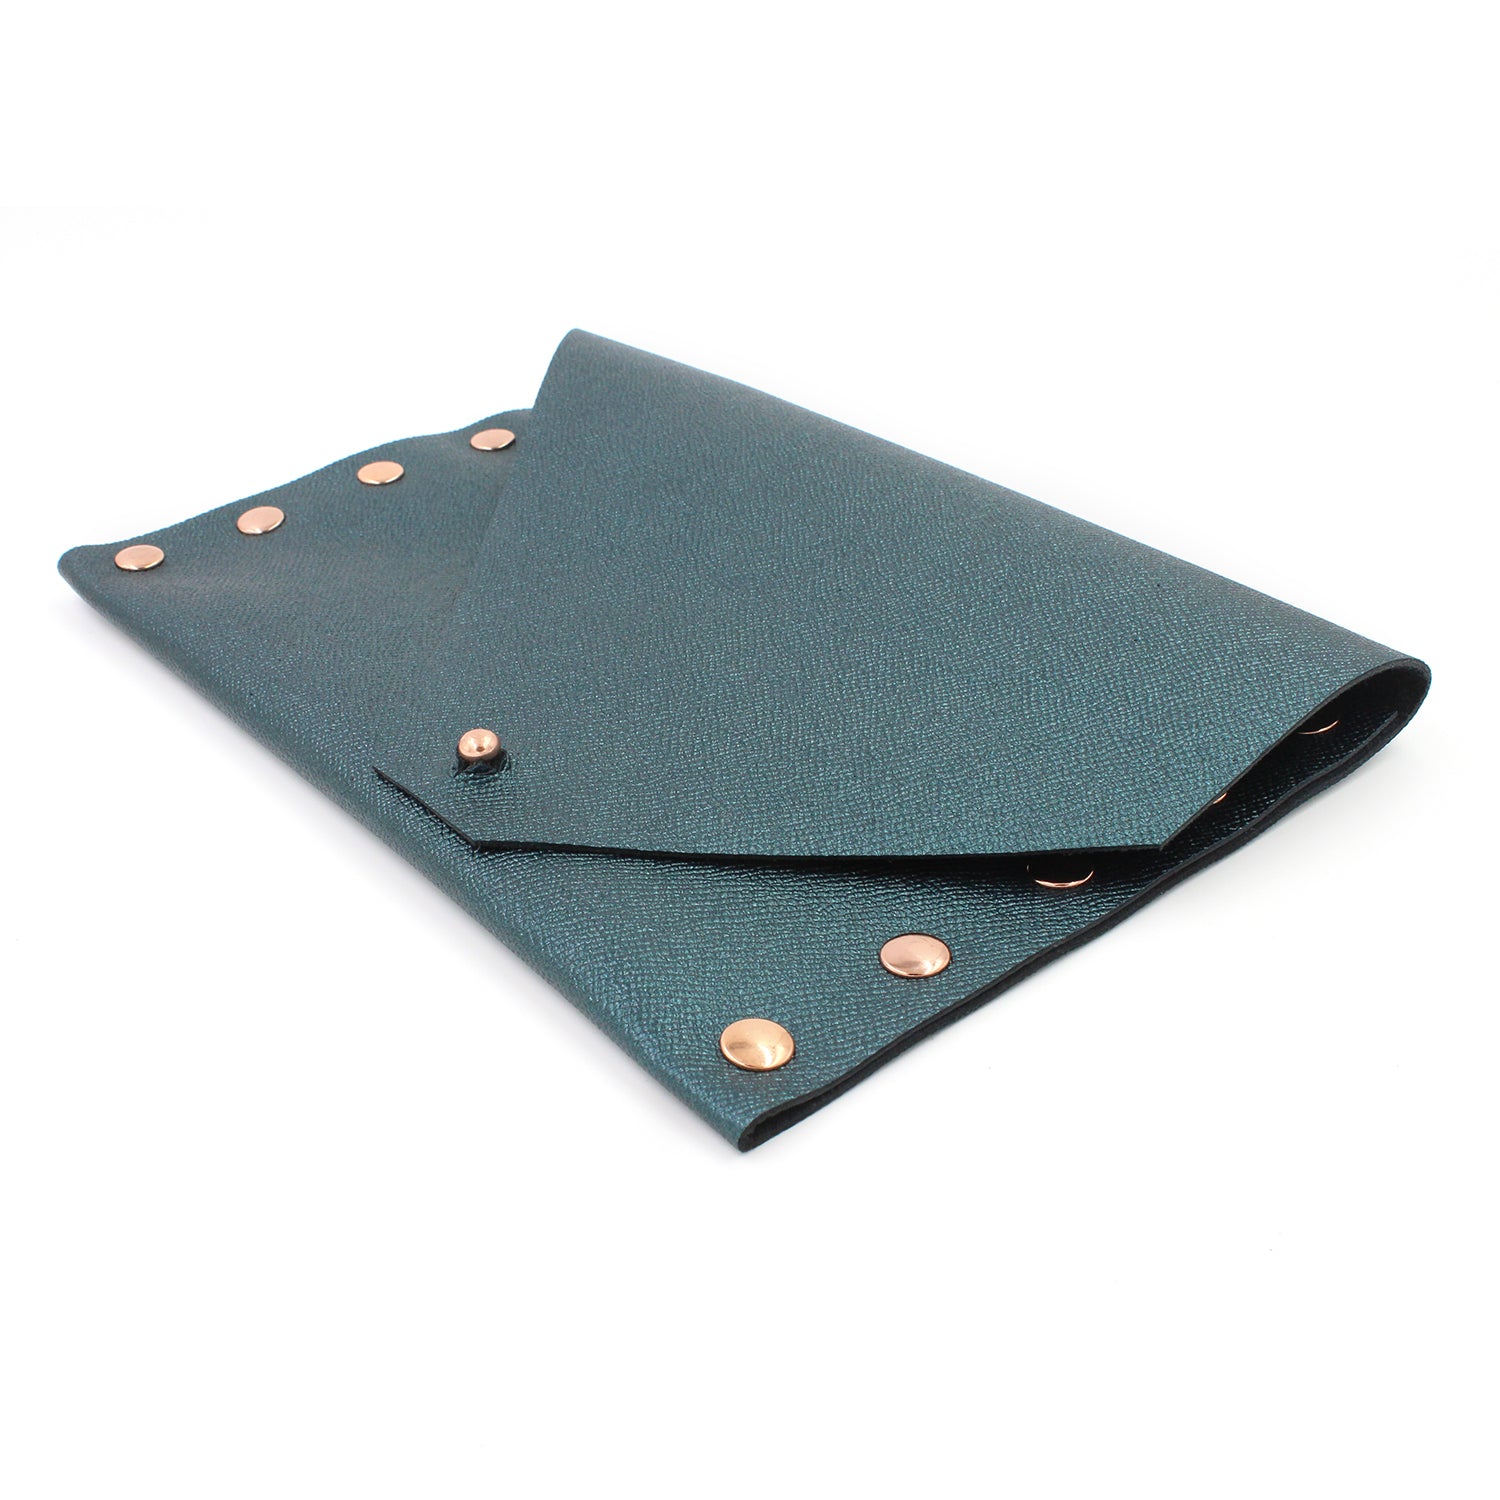 2nd Edition Shimmering Green/Blue Leather Clutch with Rose Gold Rivets